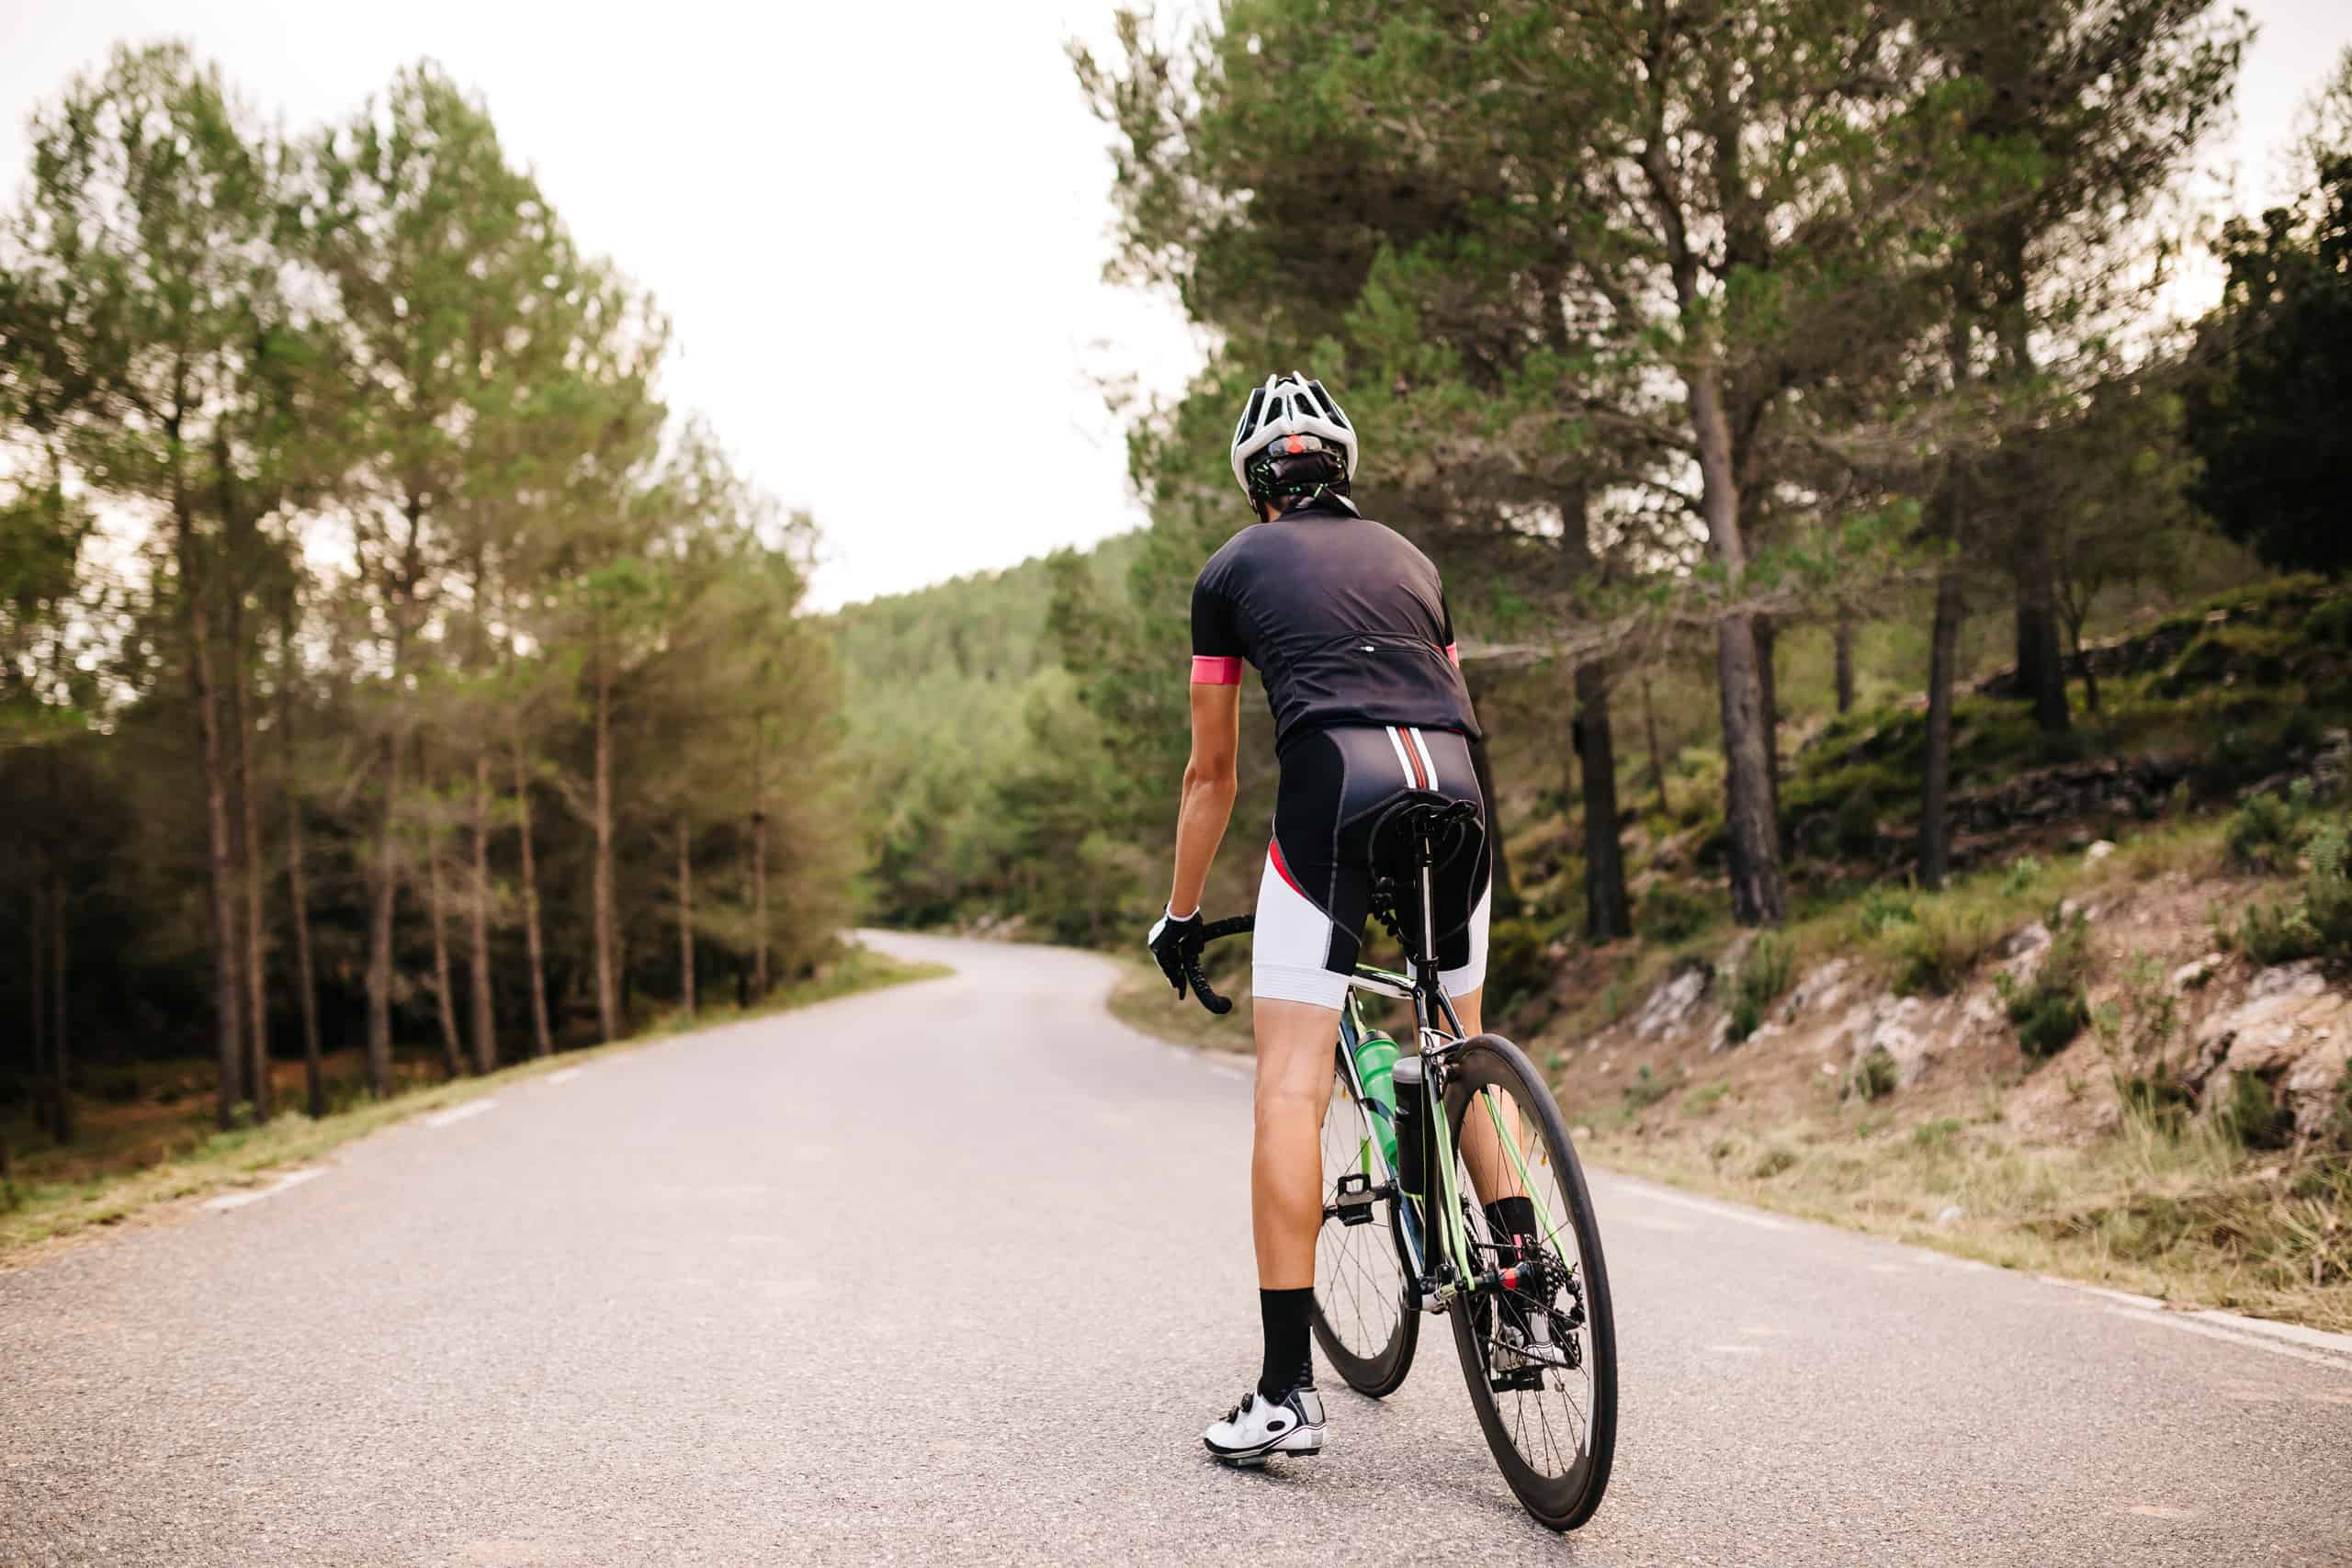 Cycling and Elliptical Training: Cardio Options for Back Pain Sufferers